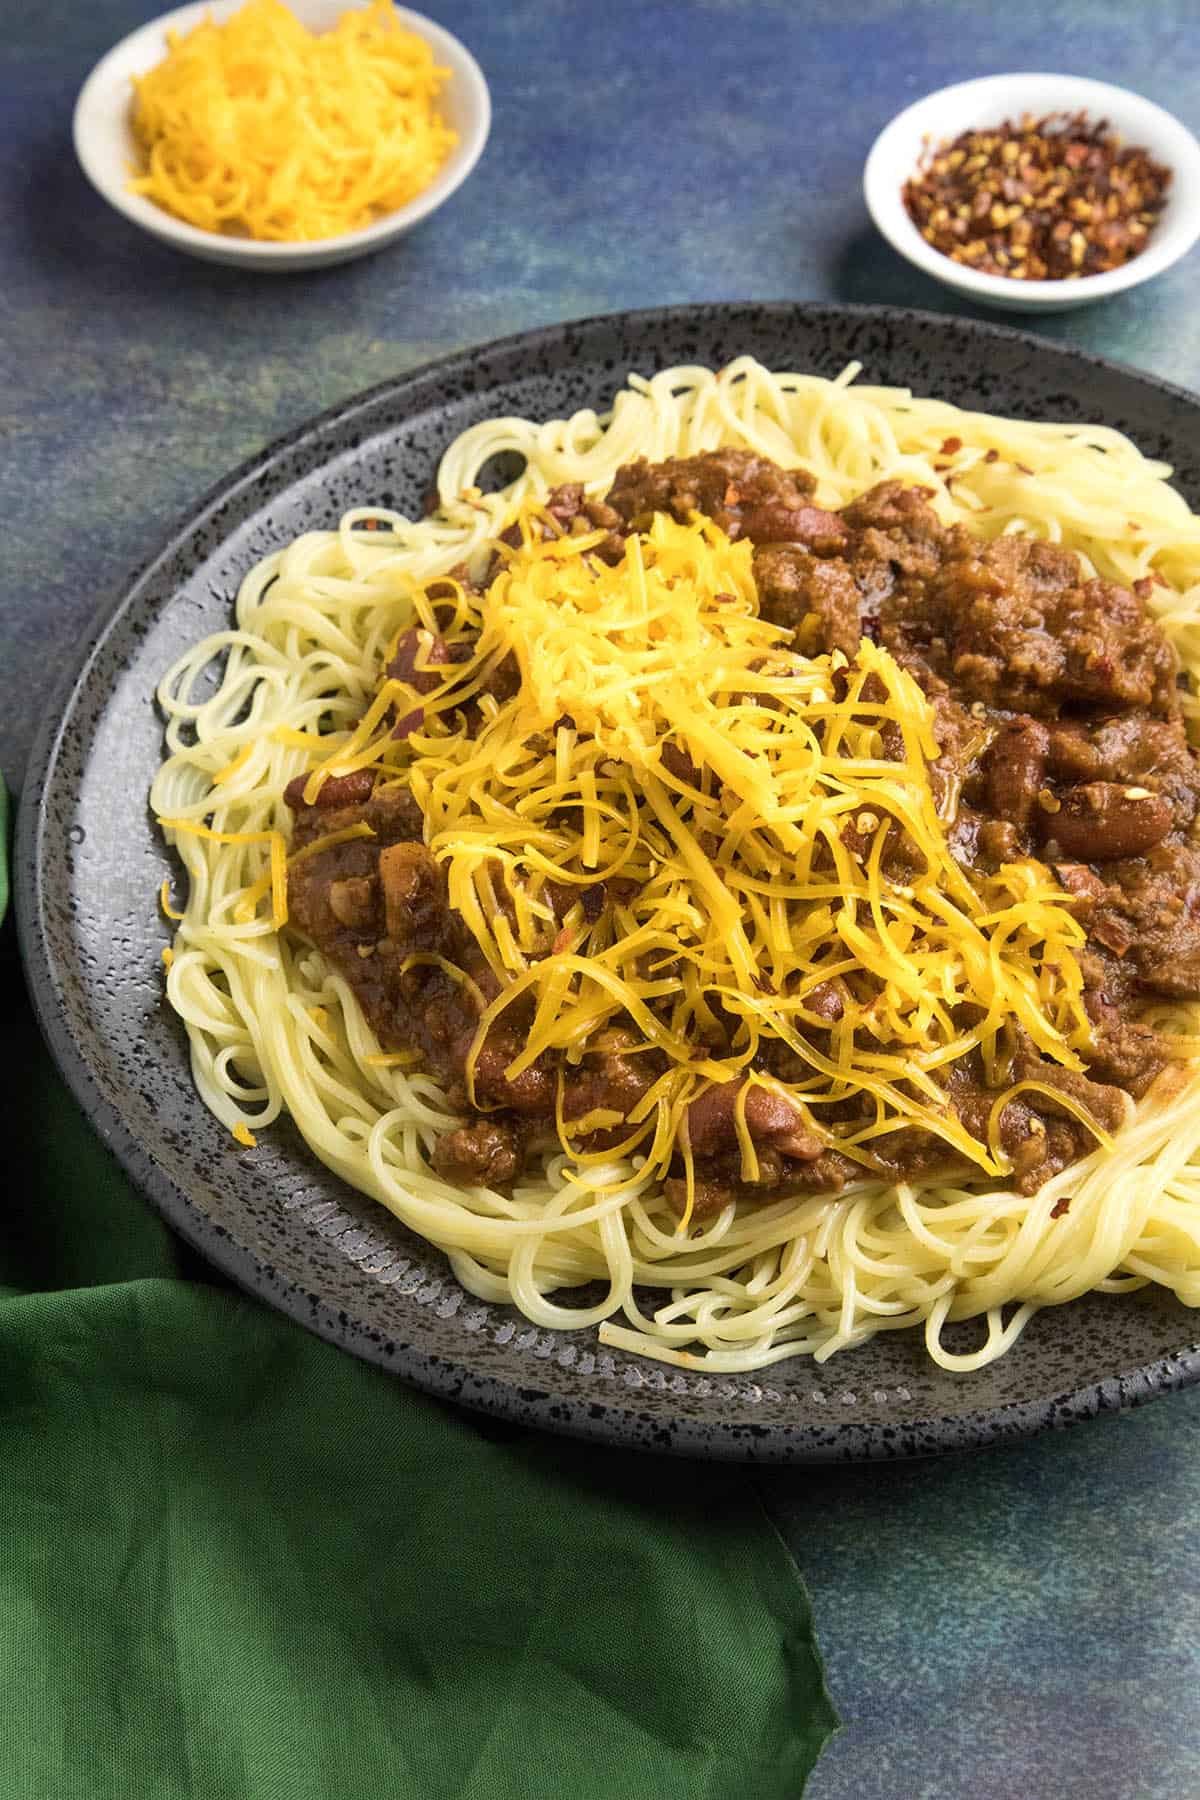 Cincinnati Chili on a plate, ready to eat